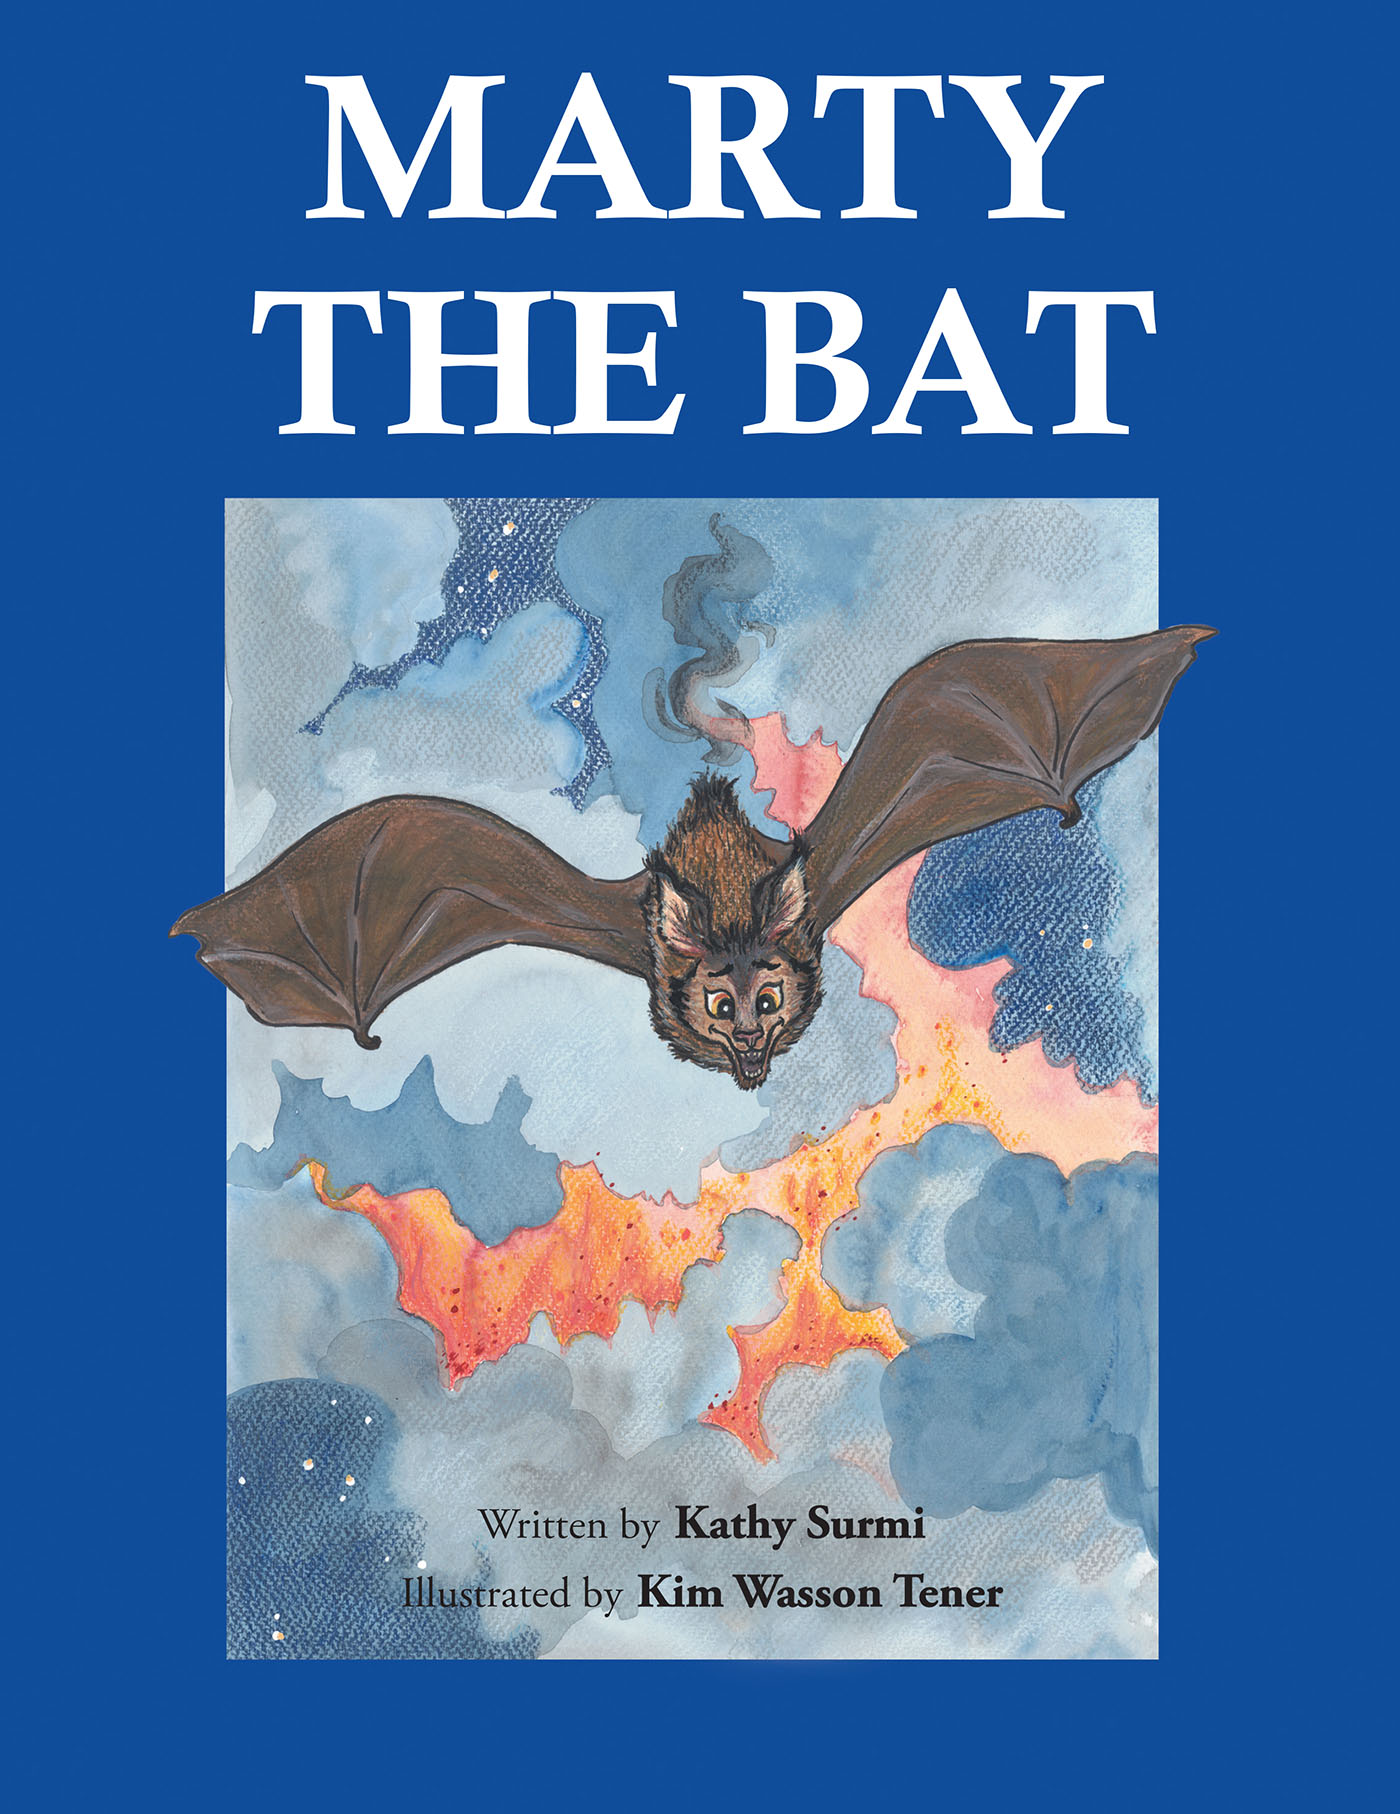 Kathy Surmi’s Newly Released "Marty the Bat" is a Charming Tale of an Unexpected Journey of Redemption